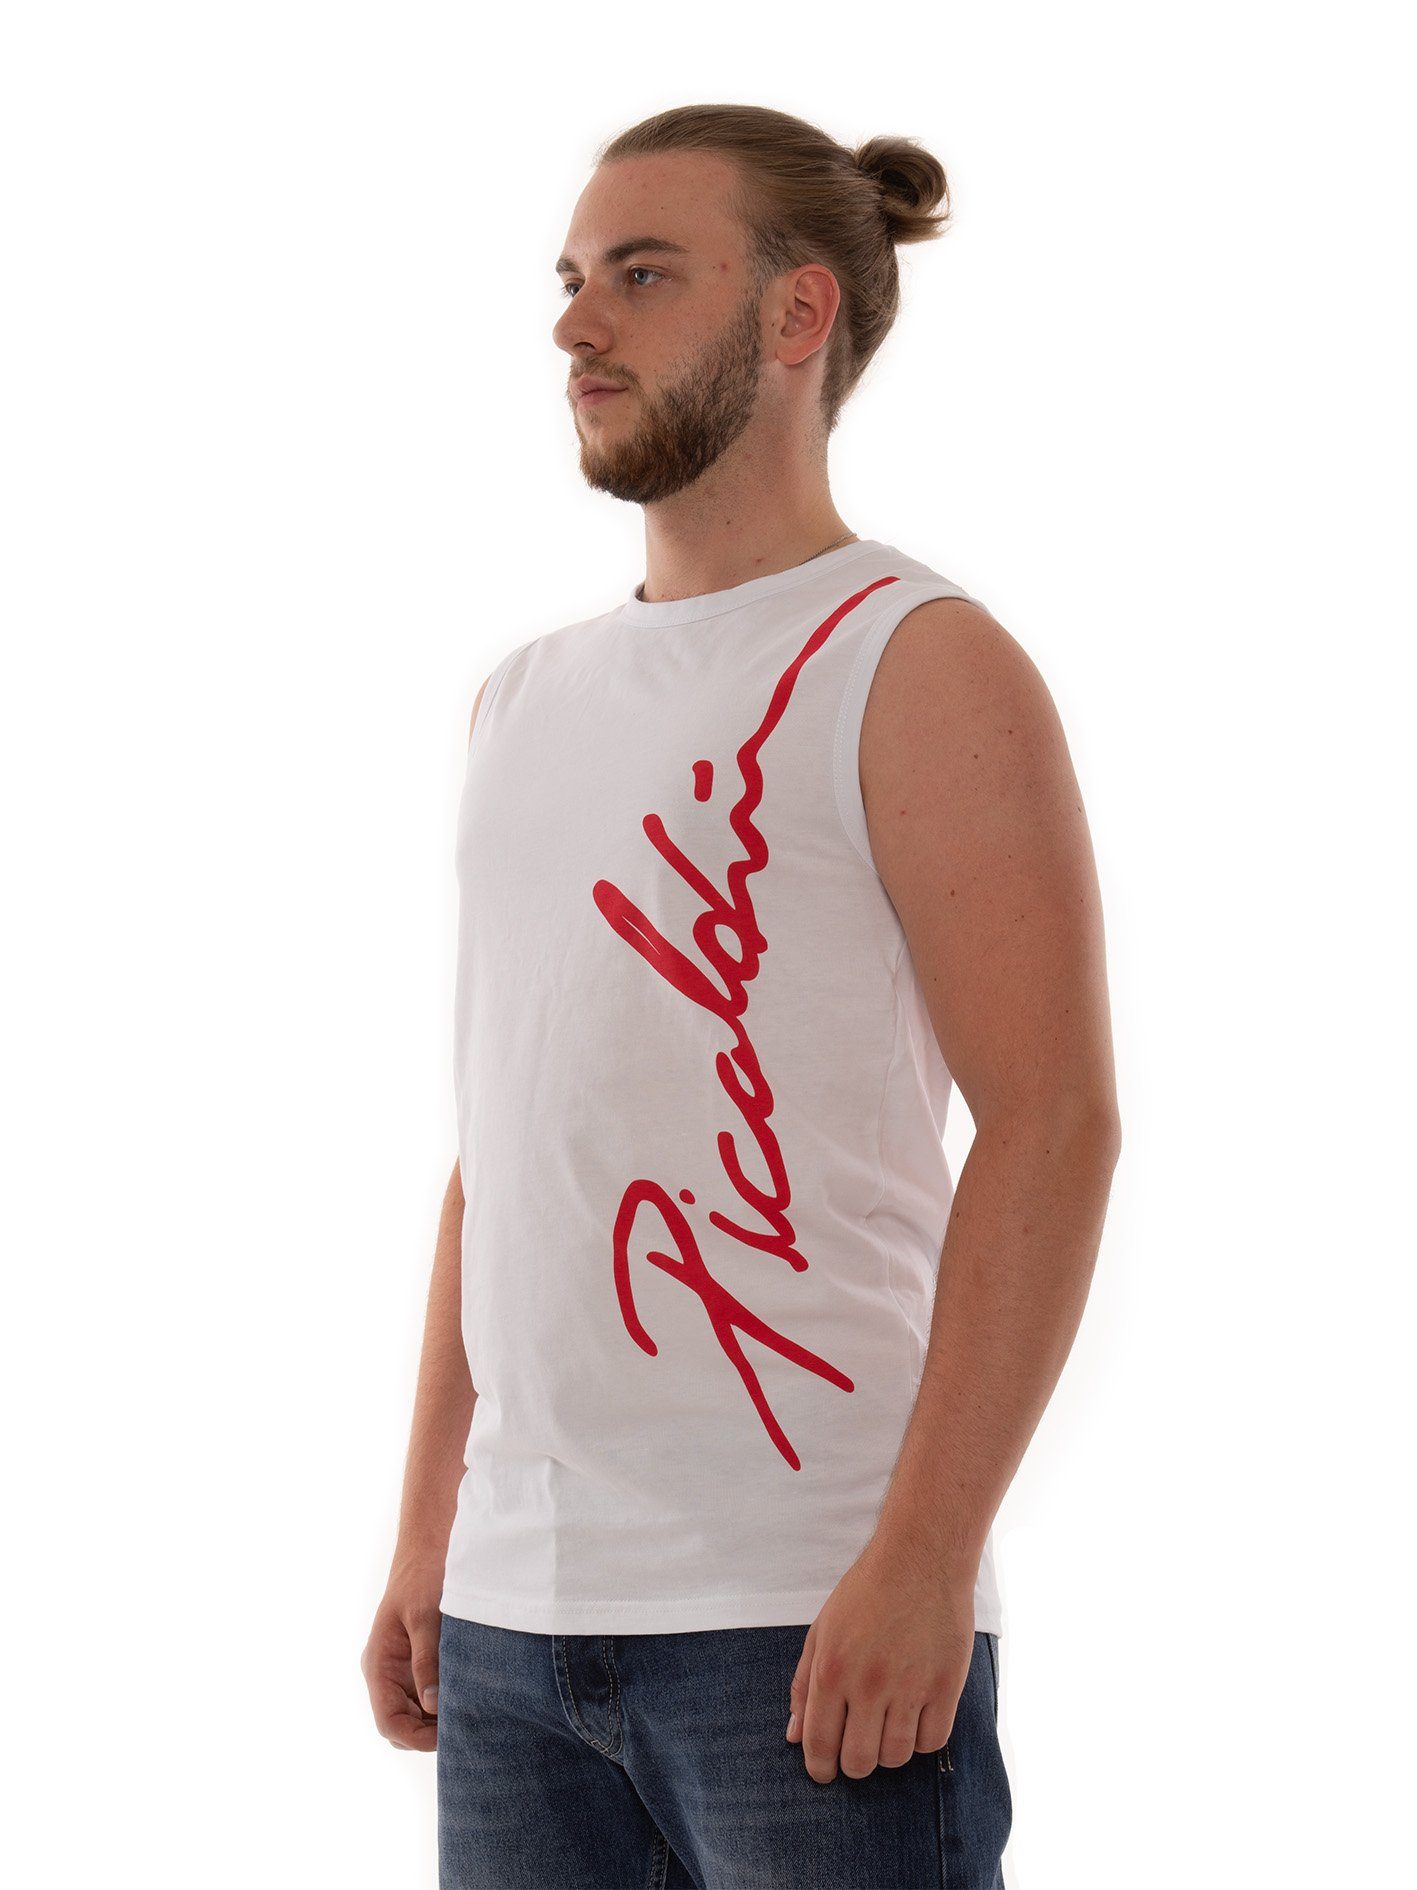 PICALDI Jeans Muskelshirt Tank Top Sommermode, Streetwear White Male